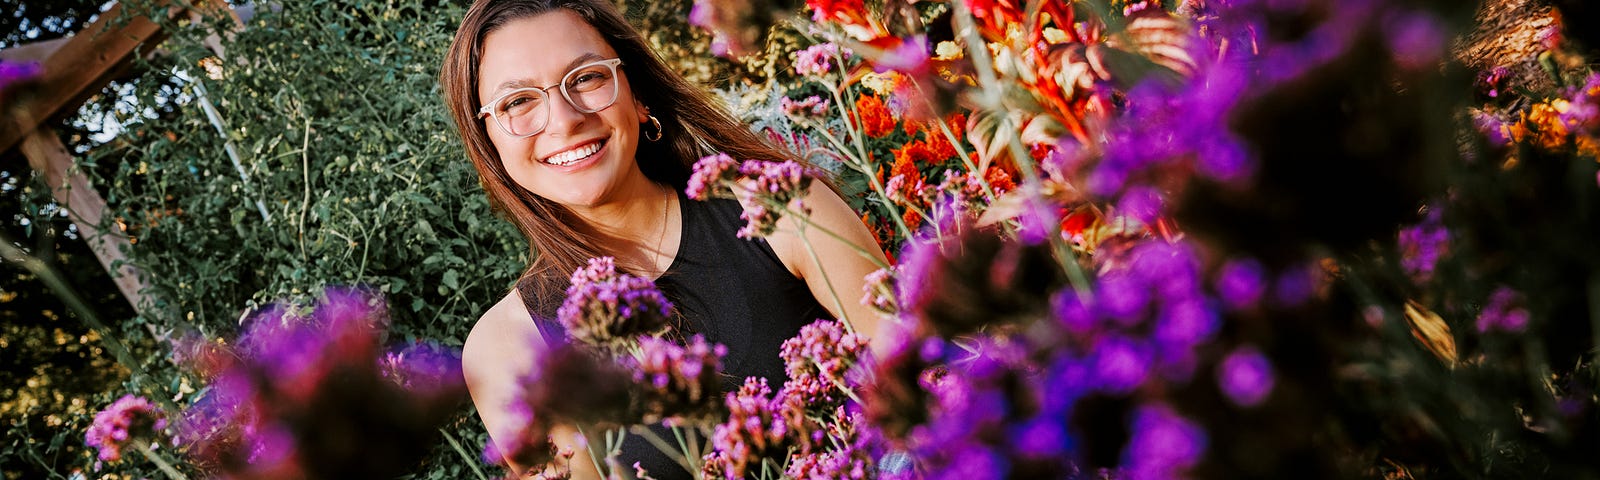 Isabella smiles for a photo surrounded by flowers on East Campus